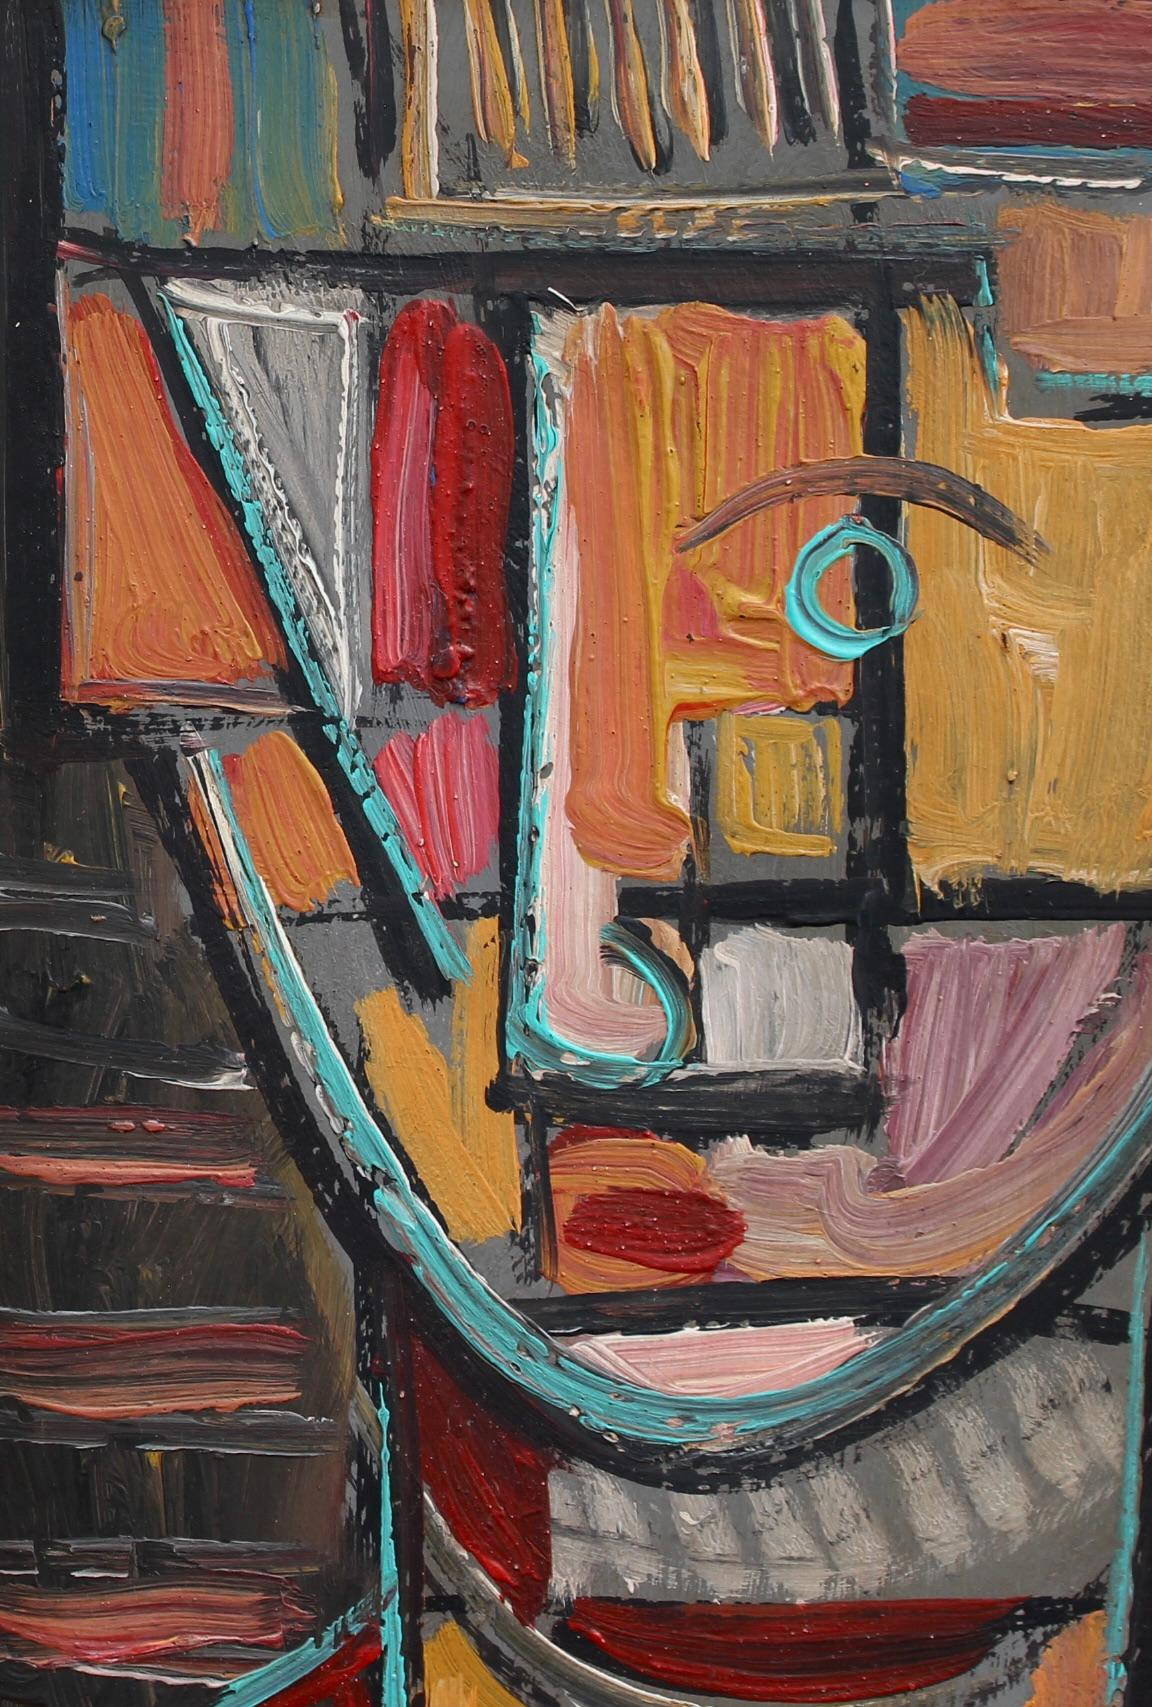 'Portrait of Cubist Man', oil on board, Berlin School (circa 1960s). A striking cubist depiction, this is a vibrant portrait of a figure in geometric perspective. The varied hues - brown, orange, turquoise, red, yellow, clay, and scarlet all combine